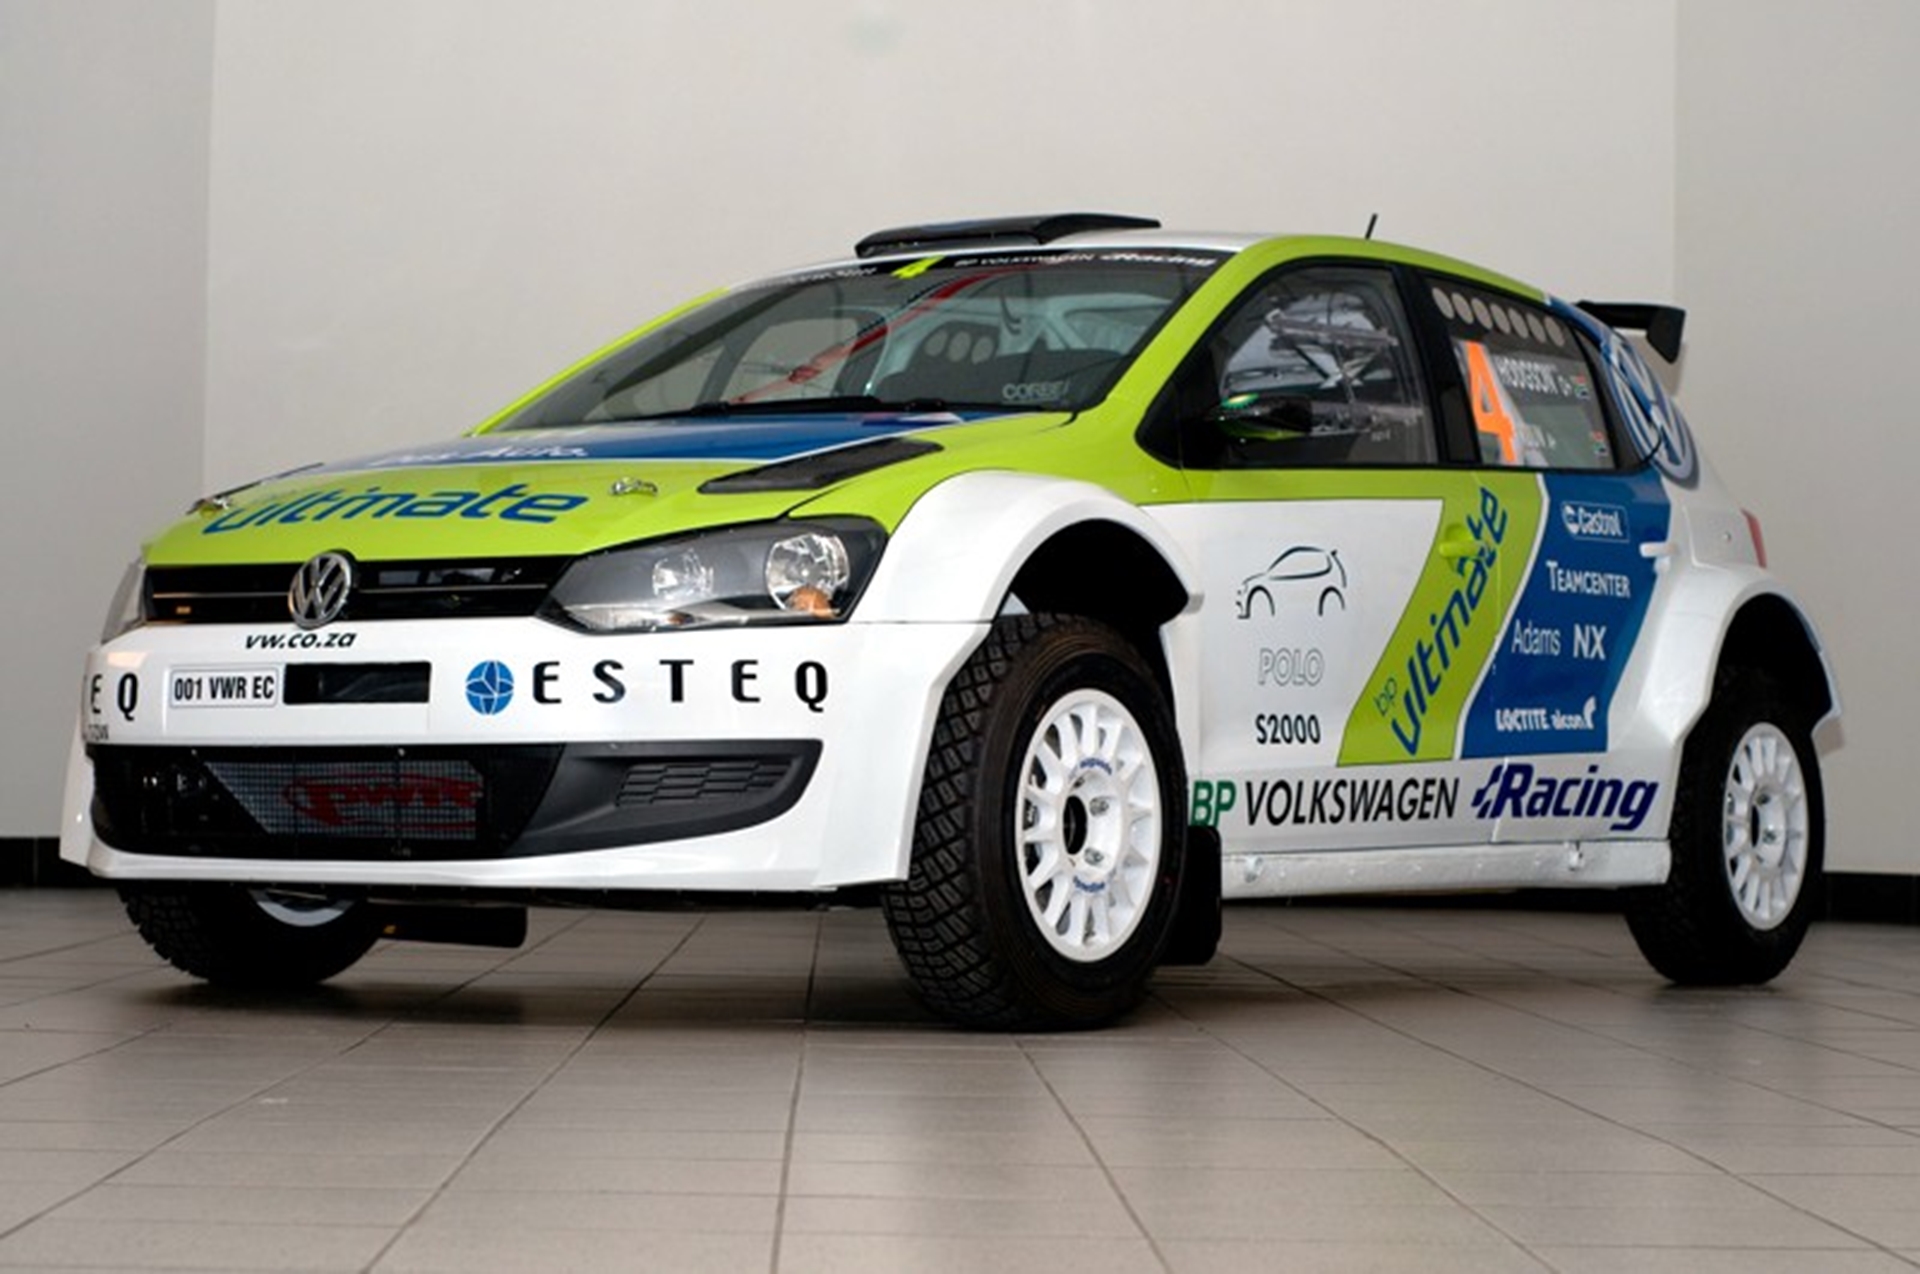 New Rally Car for Volkswagen South Africa